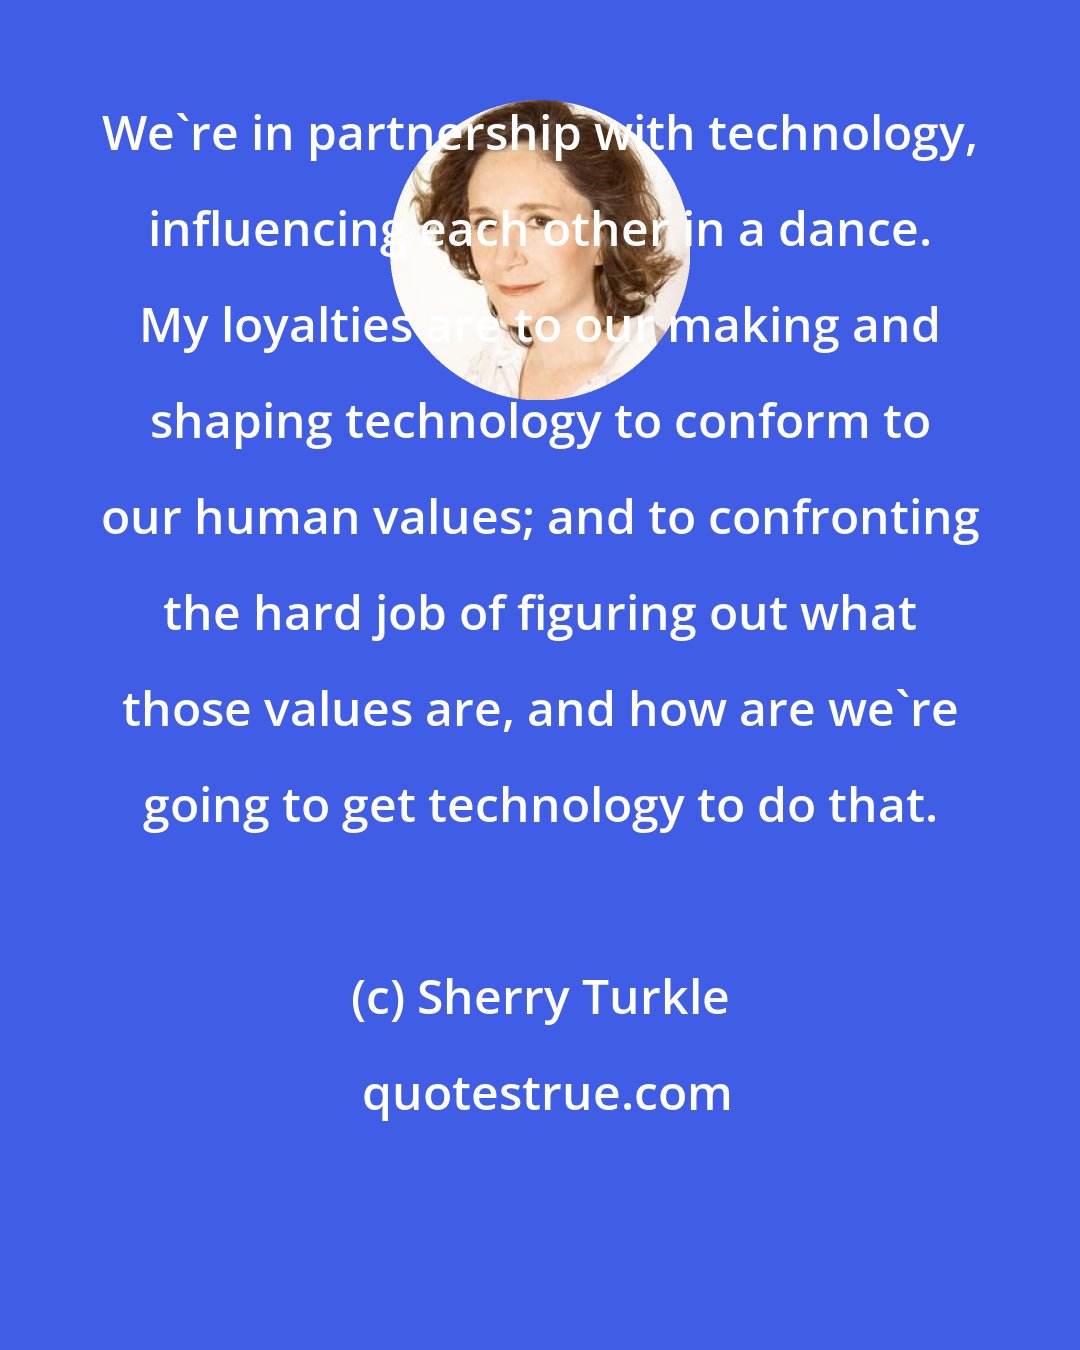 Sherry Turkle: We're in partnership with technology, influencing each other in a dance. My loyalties are to our making and shaping technology to conform to our human values; and to confronting the hard job of figuring out what those values are, and how are we're going to get technology to do that.